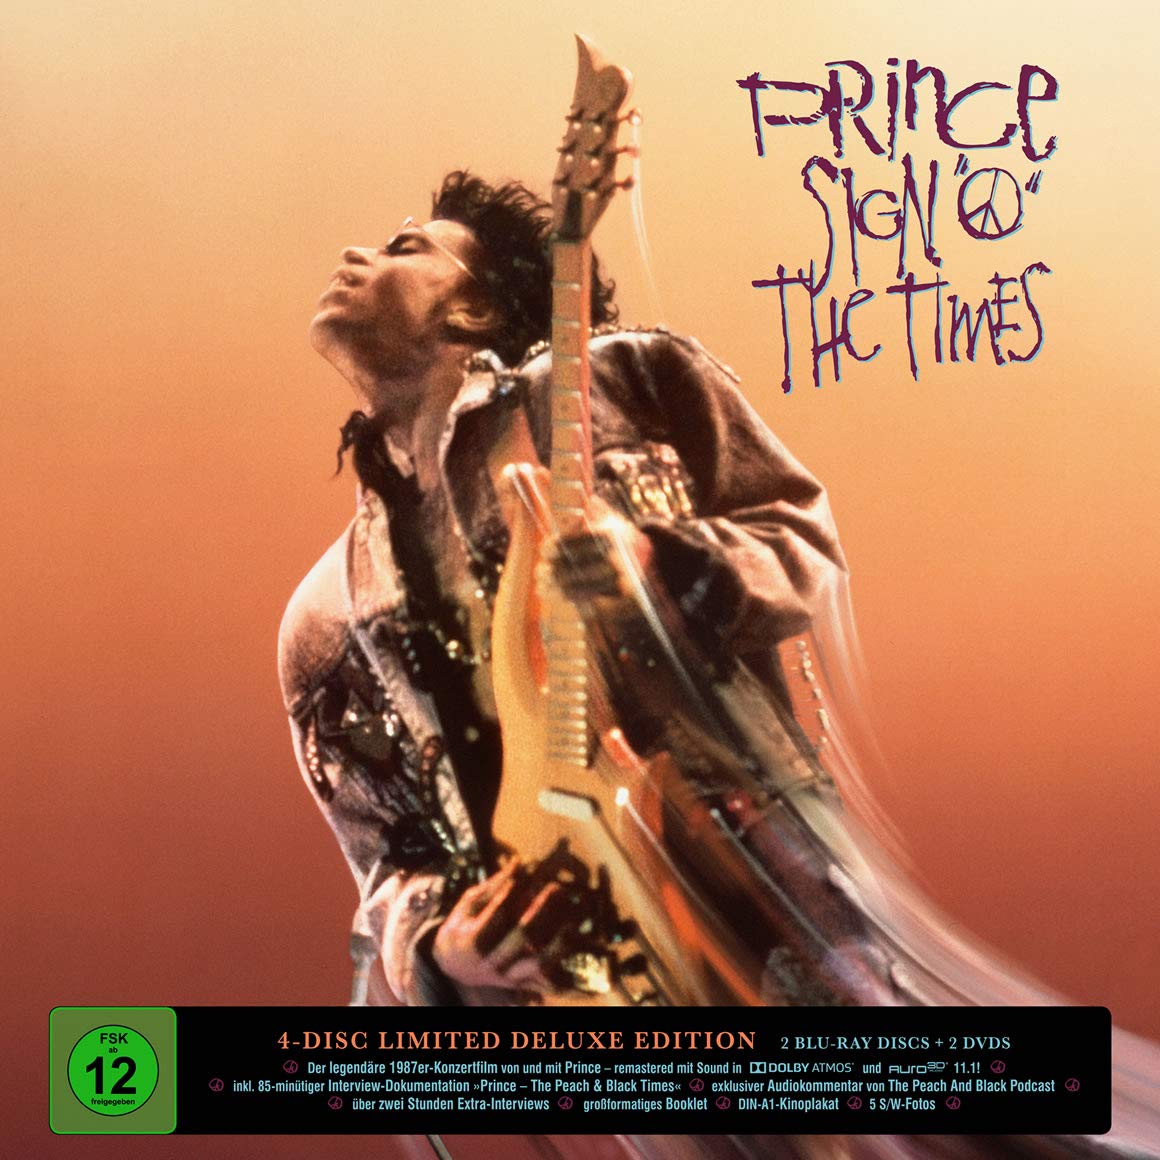 Prince - Sign "O" the Times - Limited Deluxe Edition - Classic